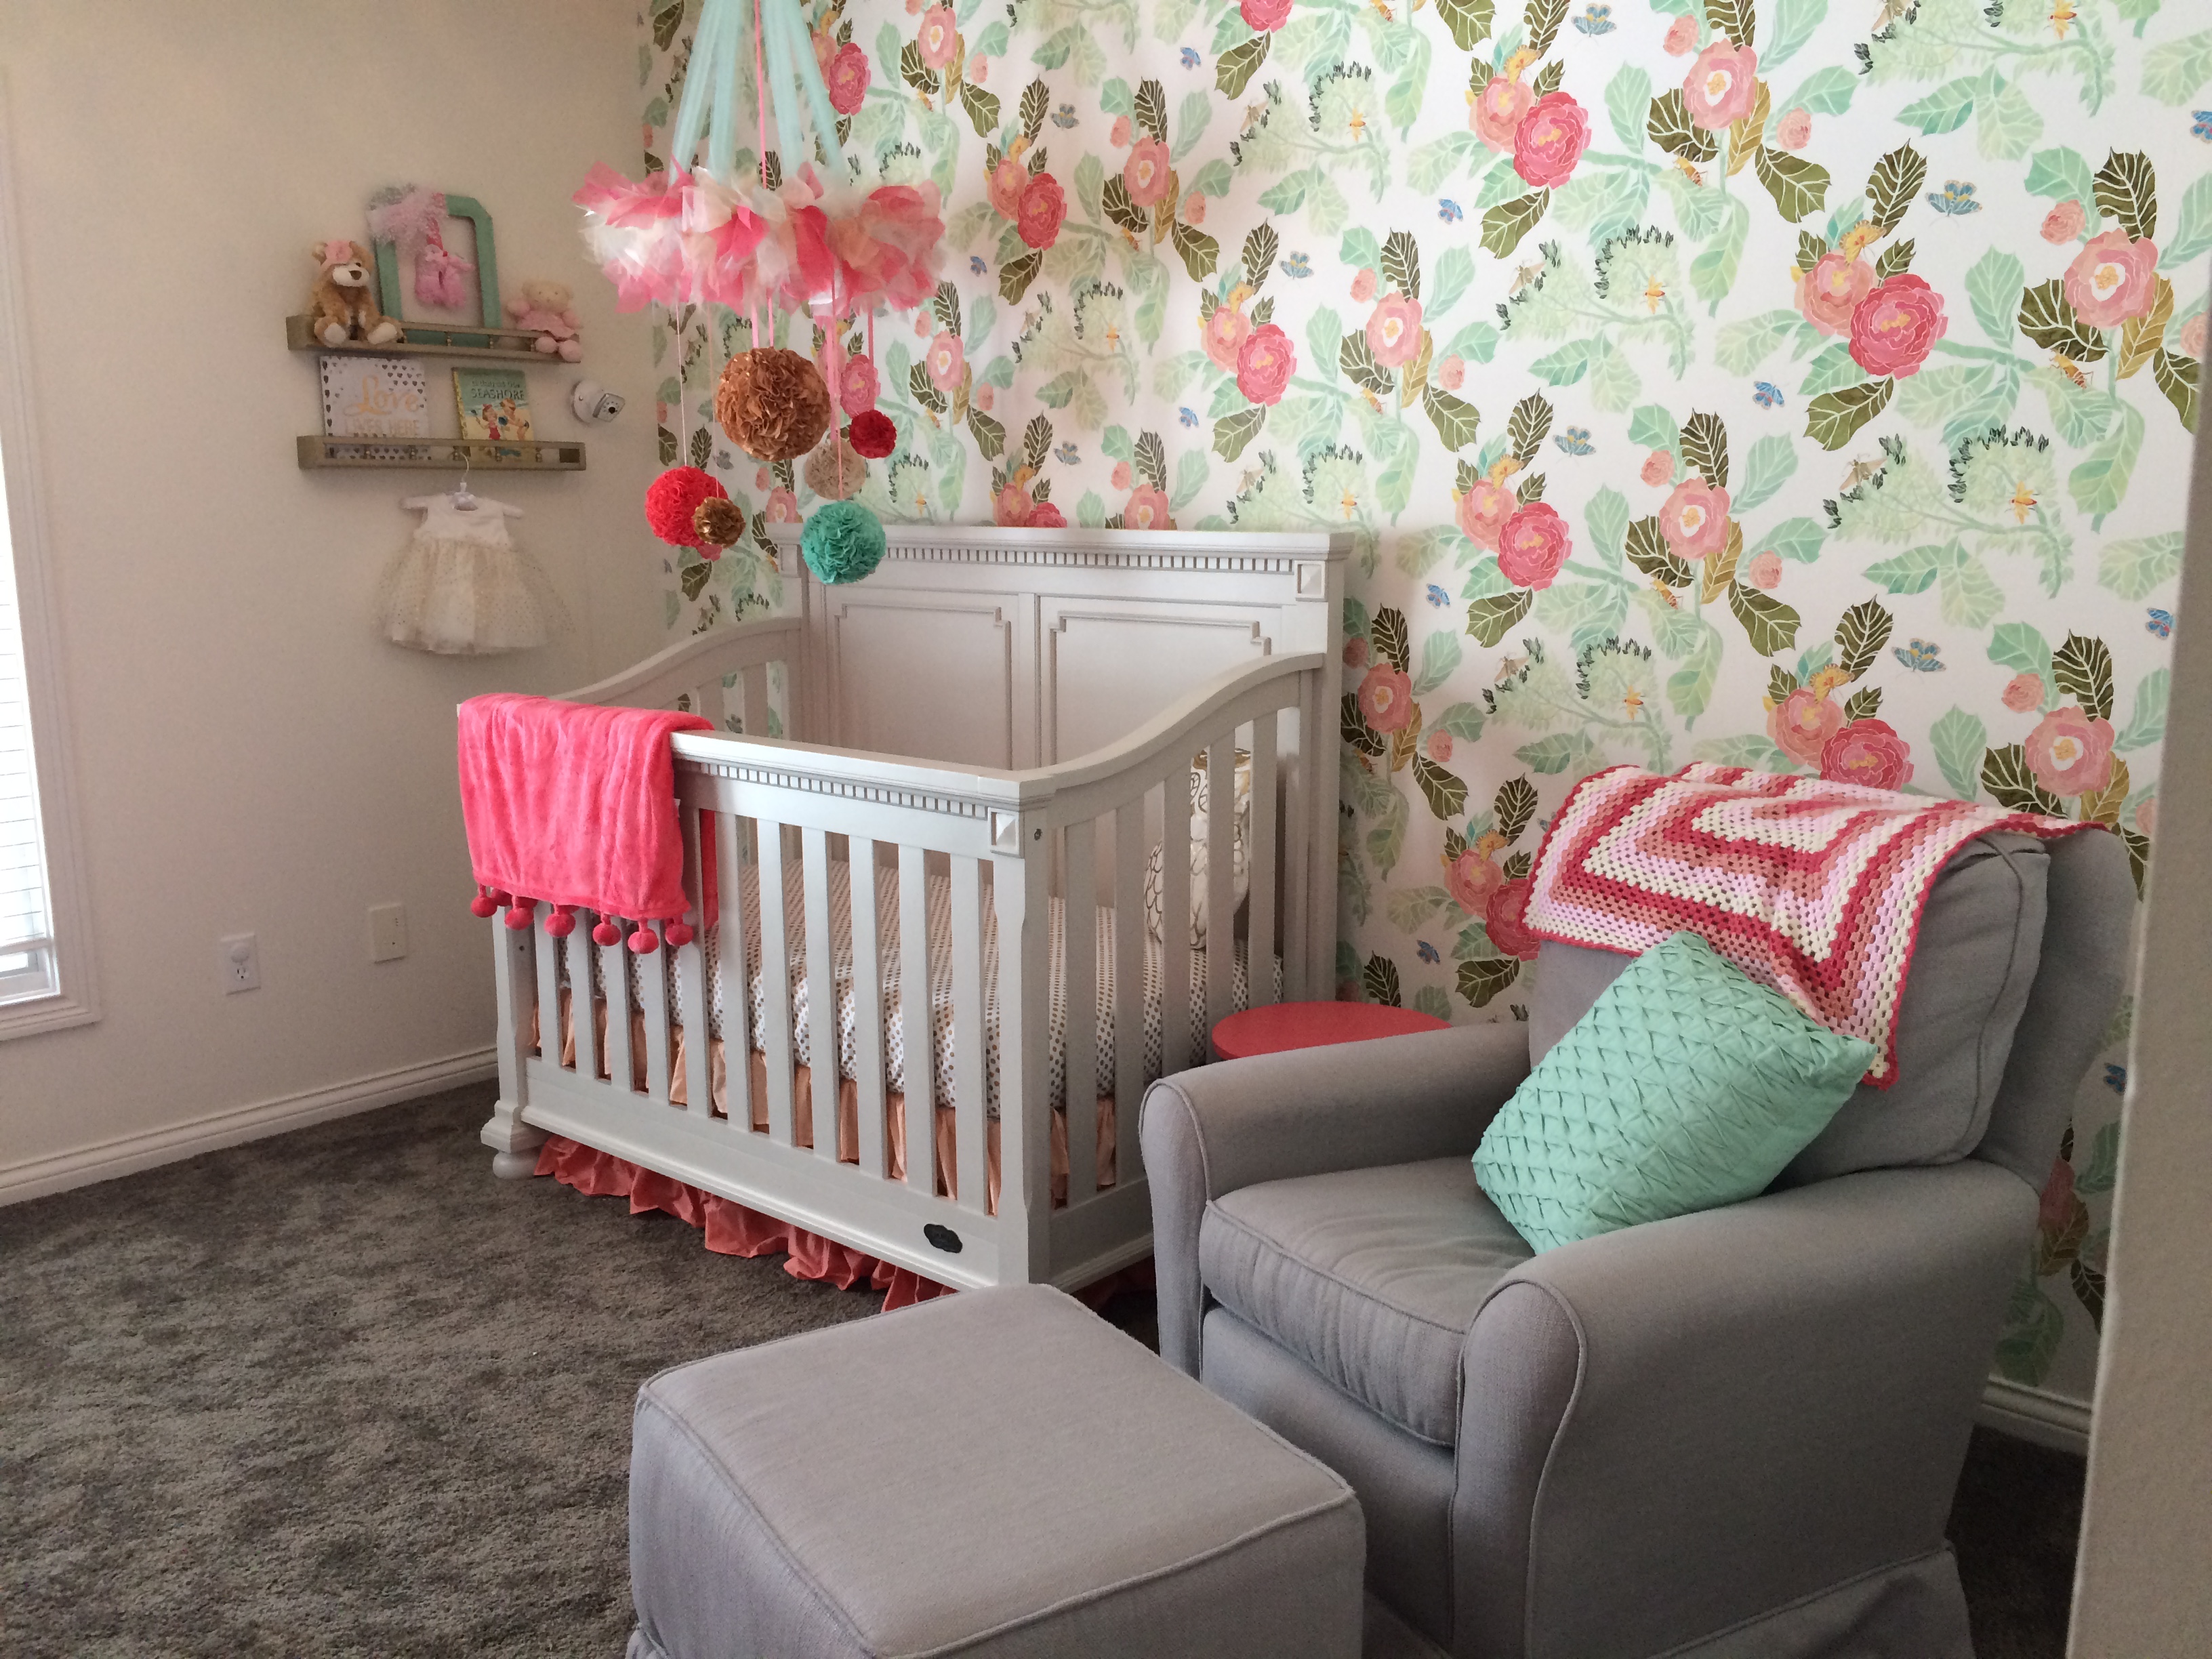 Peony Accent Wall in this Girly Chic Nursery